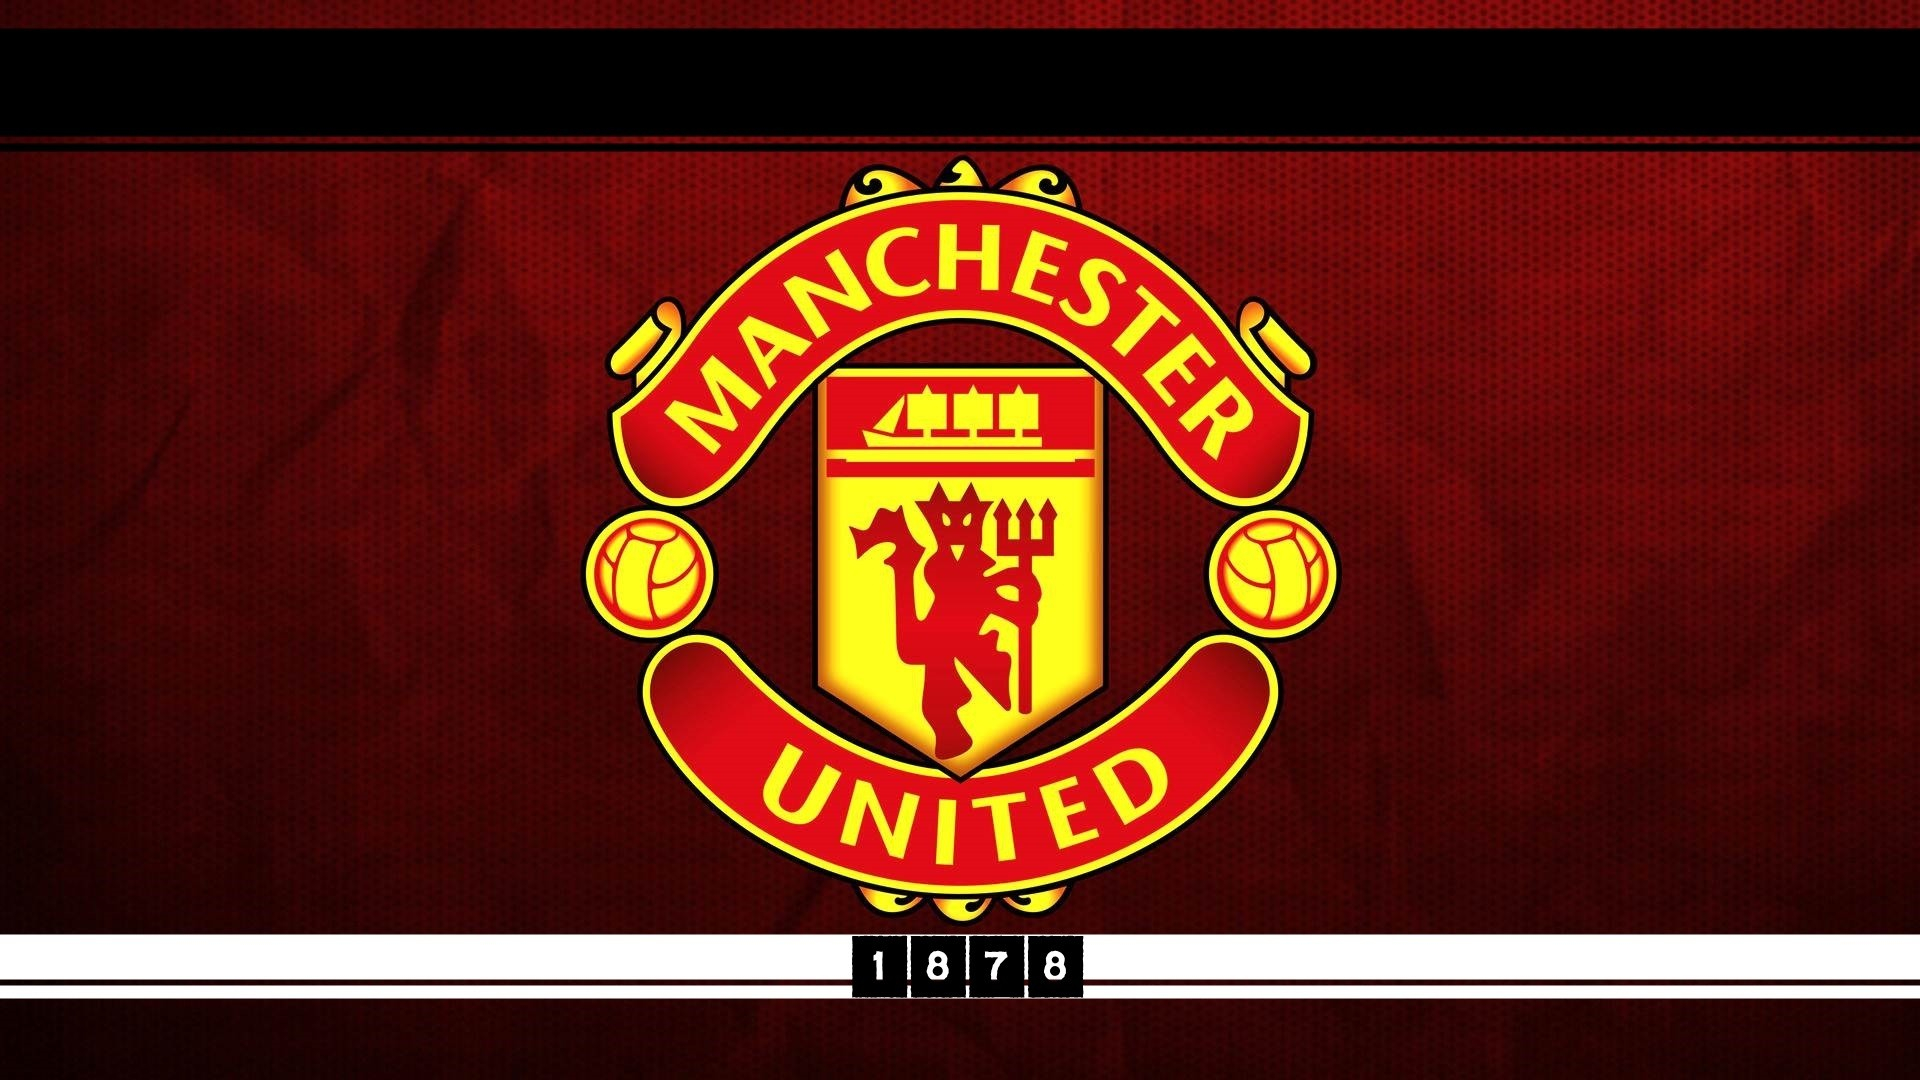 1920x1080 Wallpaper : sports, logo, England, soccer clubs, neon sign, brand, Manchester United, advertising, px, font, liqueur goodfon 719760 HD Wallpapers